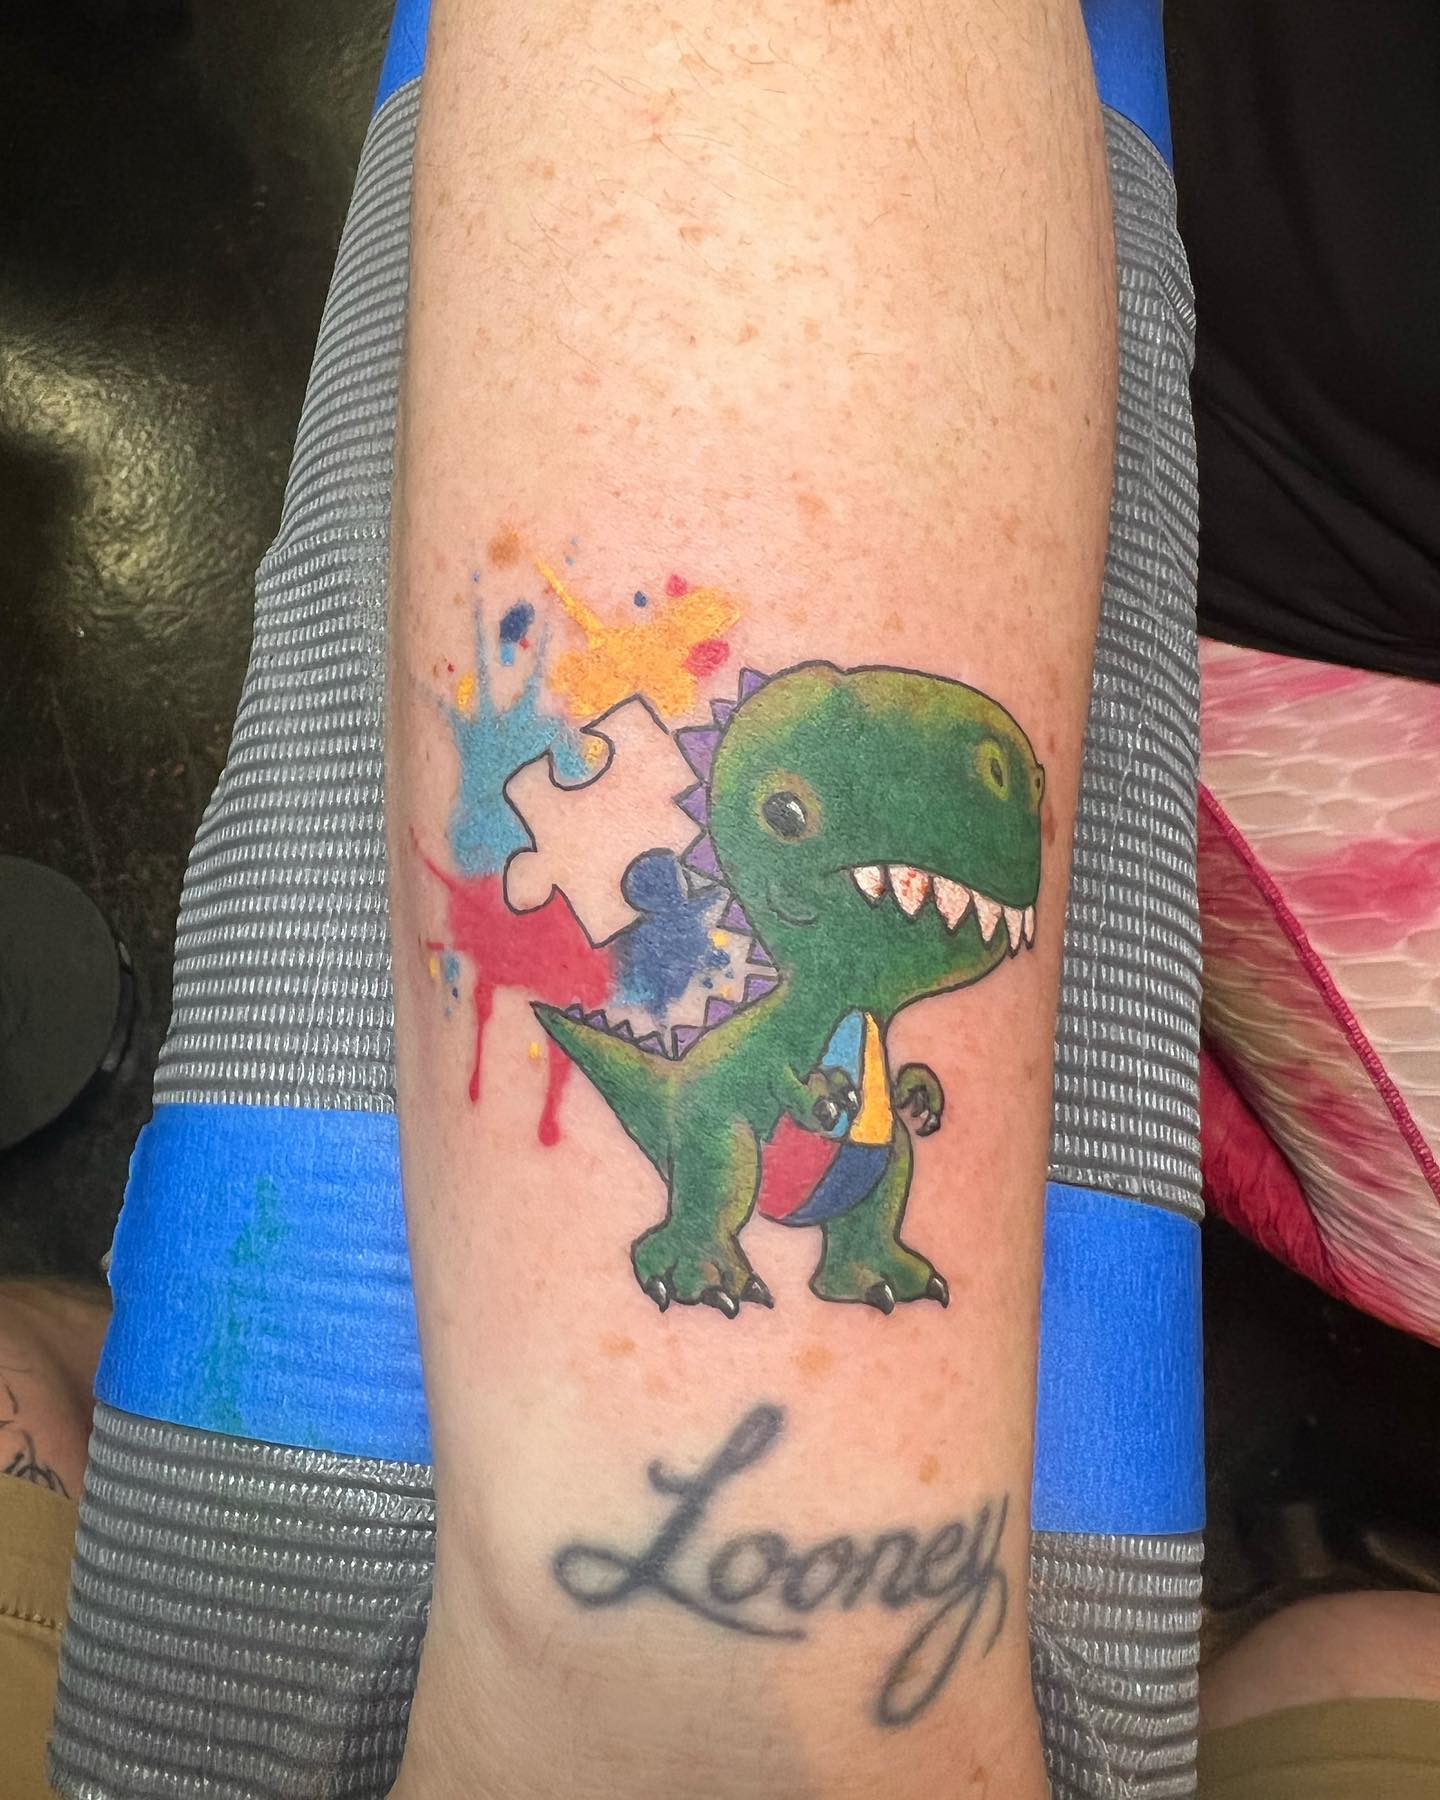 This autism tattoo shows your love and closeness to your kid who may have autism, perfect for caring parents.